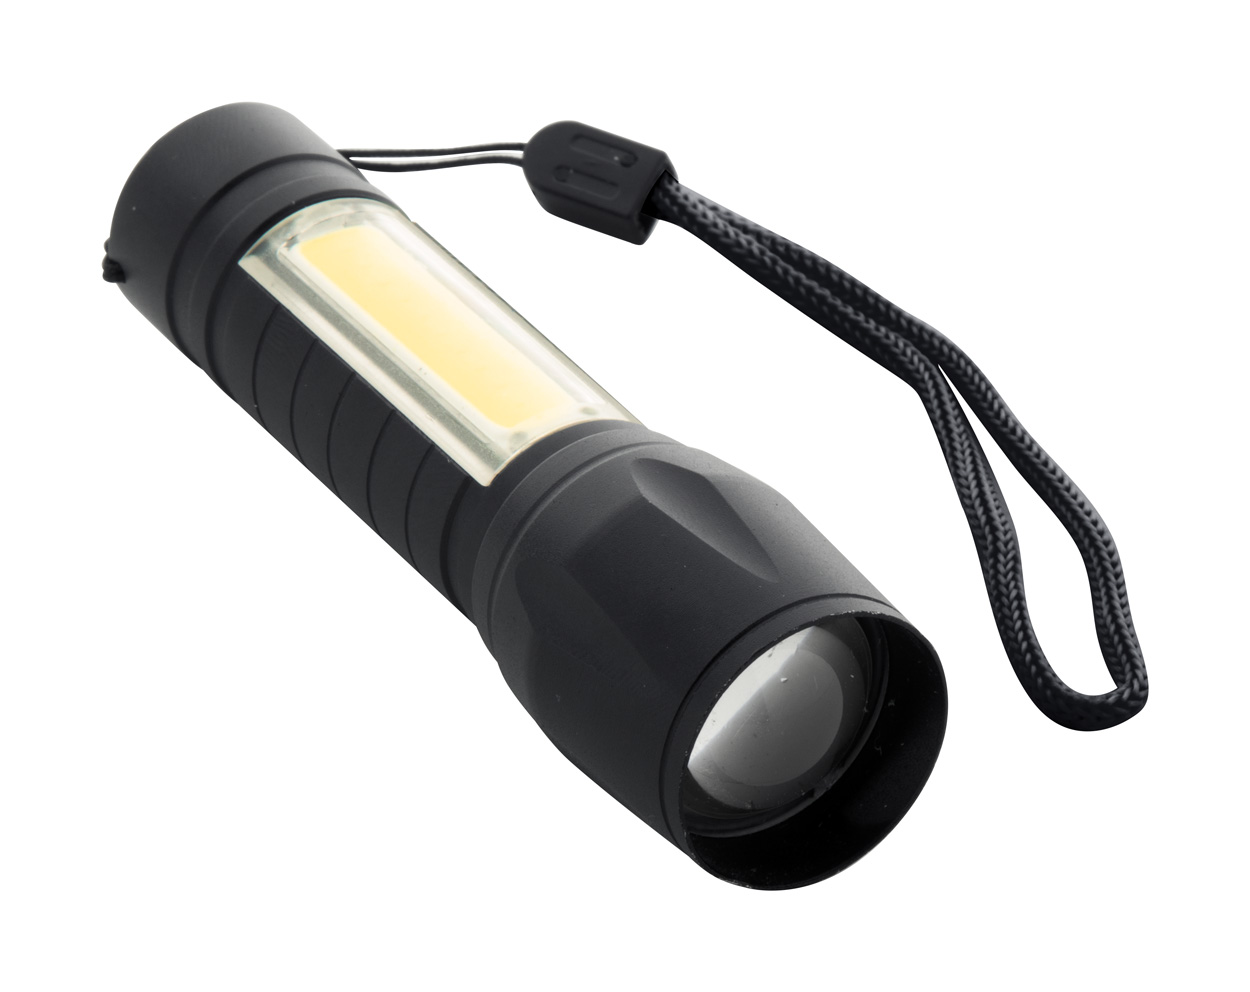 Chargelight Zoom rechargeable flashlight - black